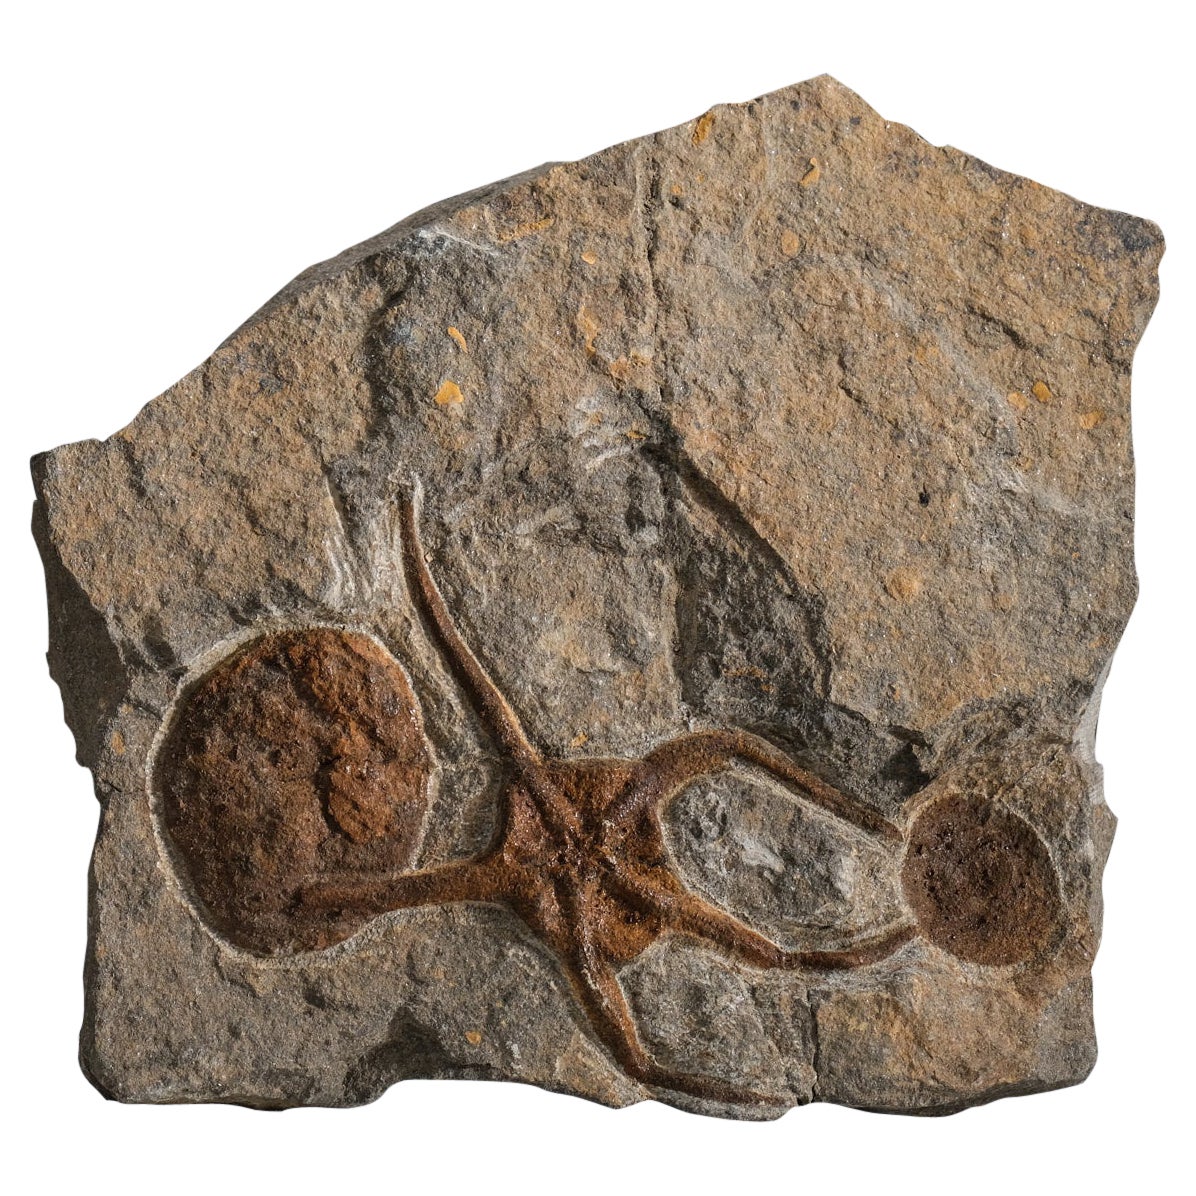 Ophiuroidea Fossile d'ophiure (1.2 lbs)